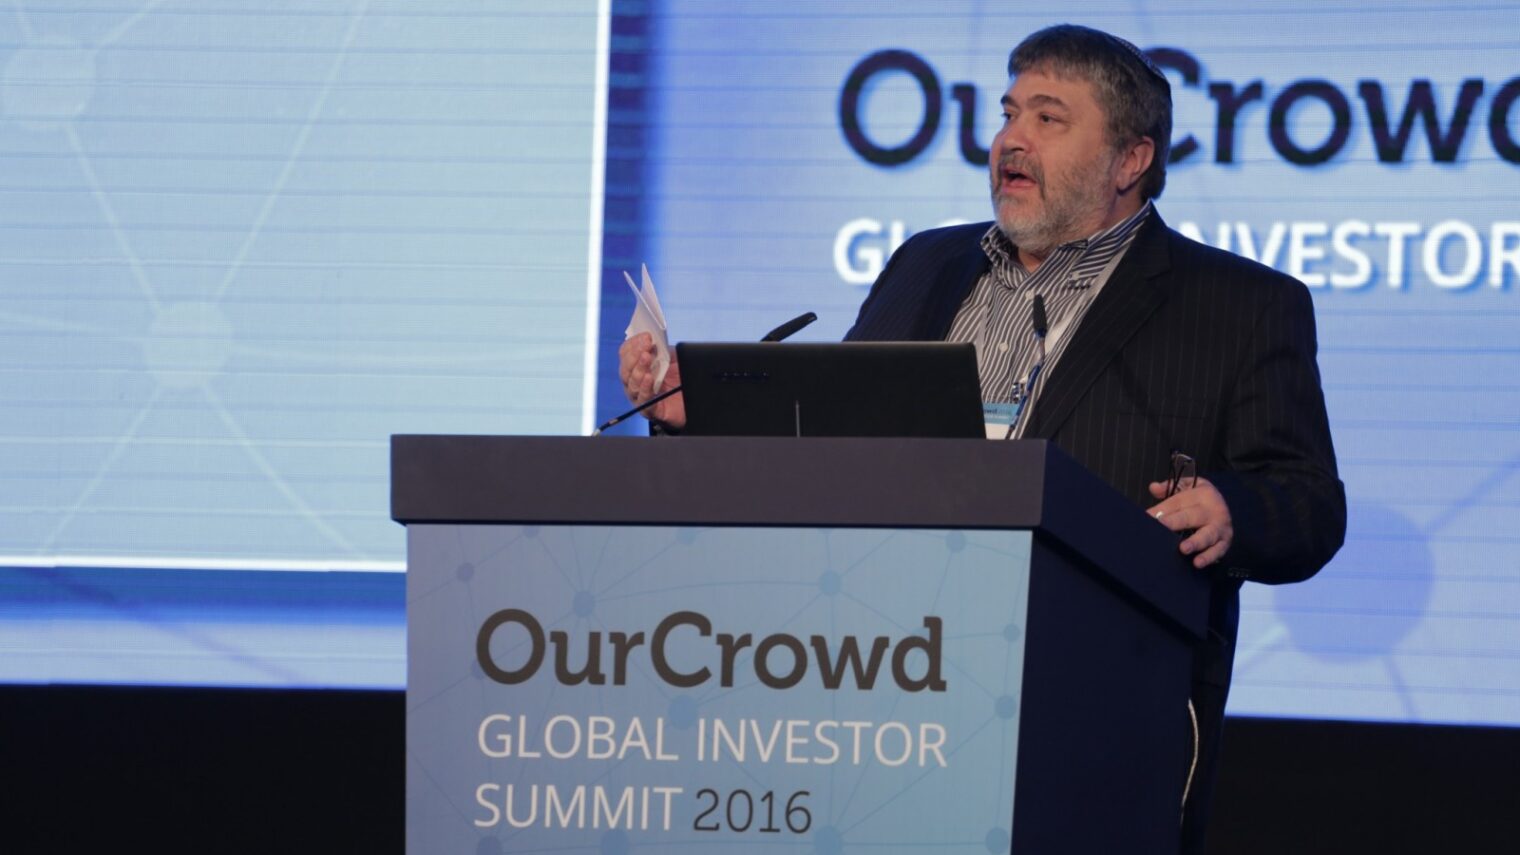 Jon Medved speaks to the audience at the 2016 OurCrowd Global Investor Summit in Jerusalem. Photo courtesy